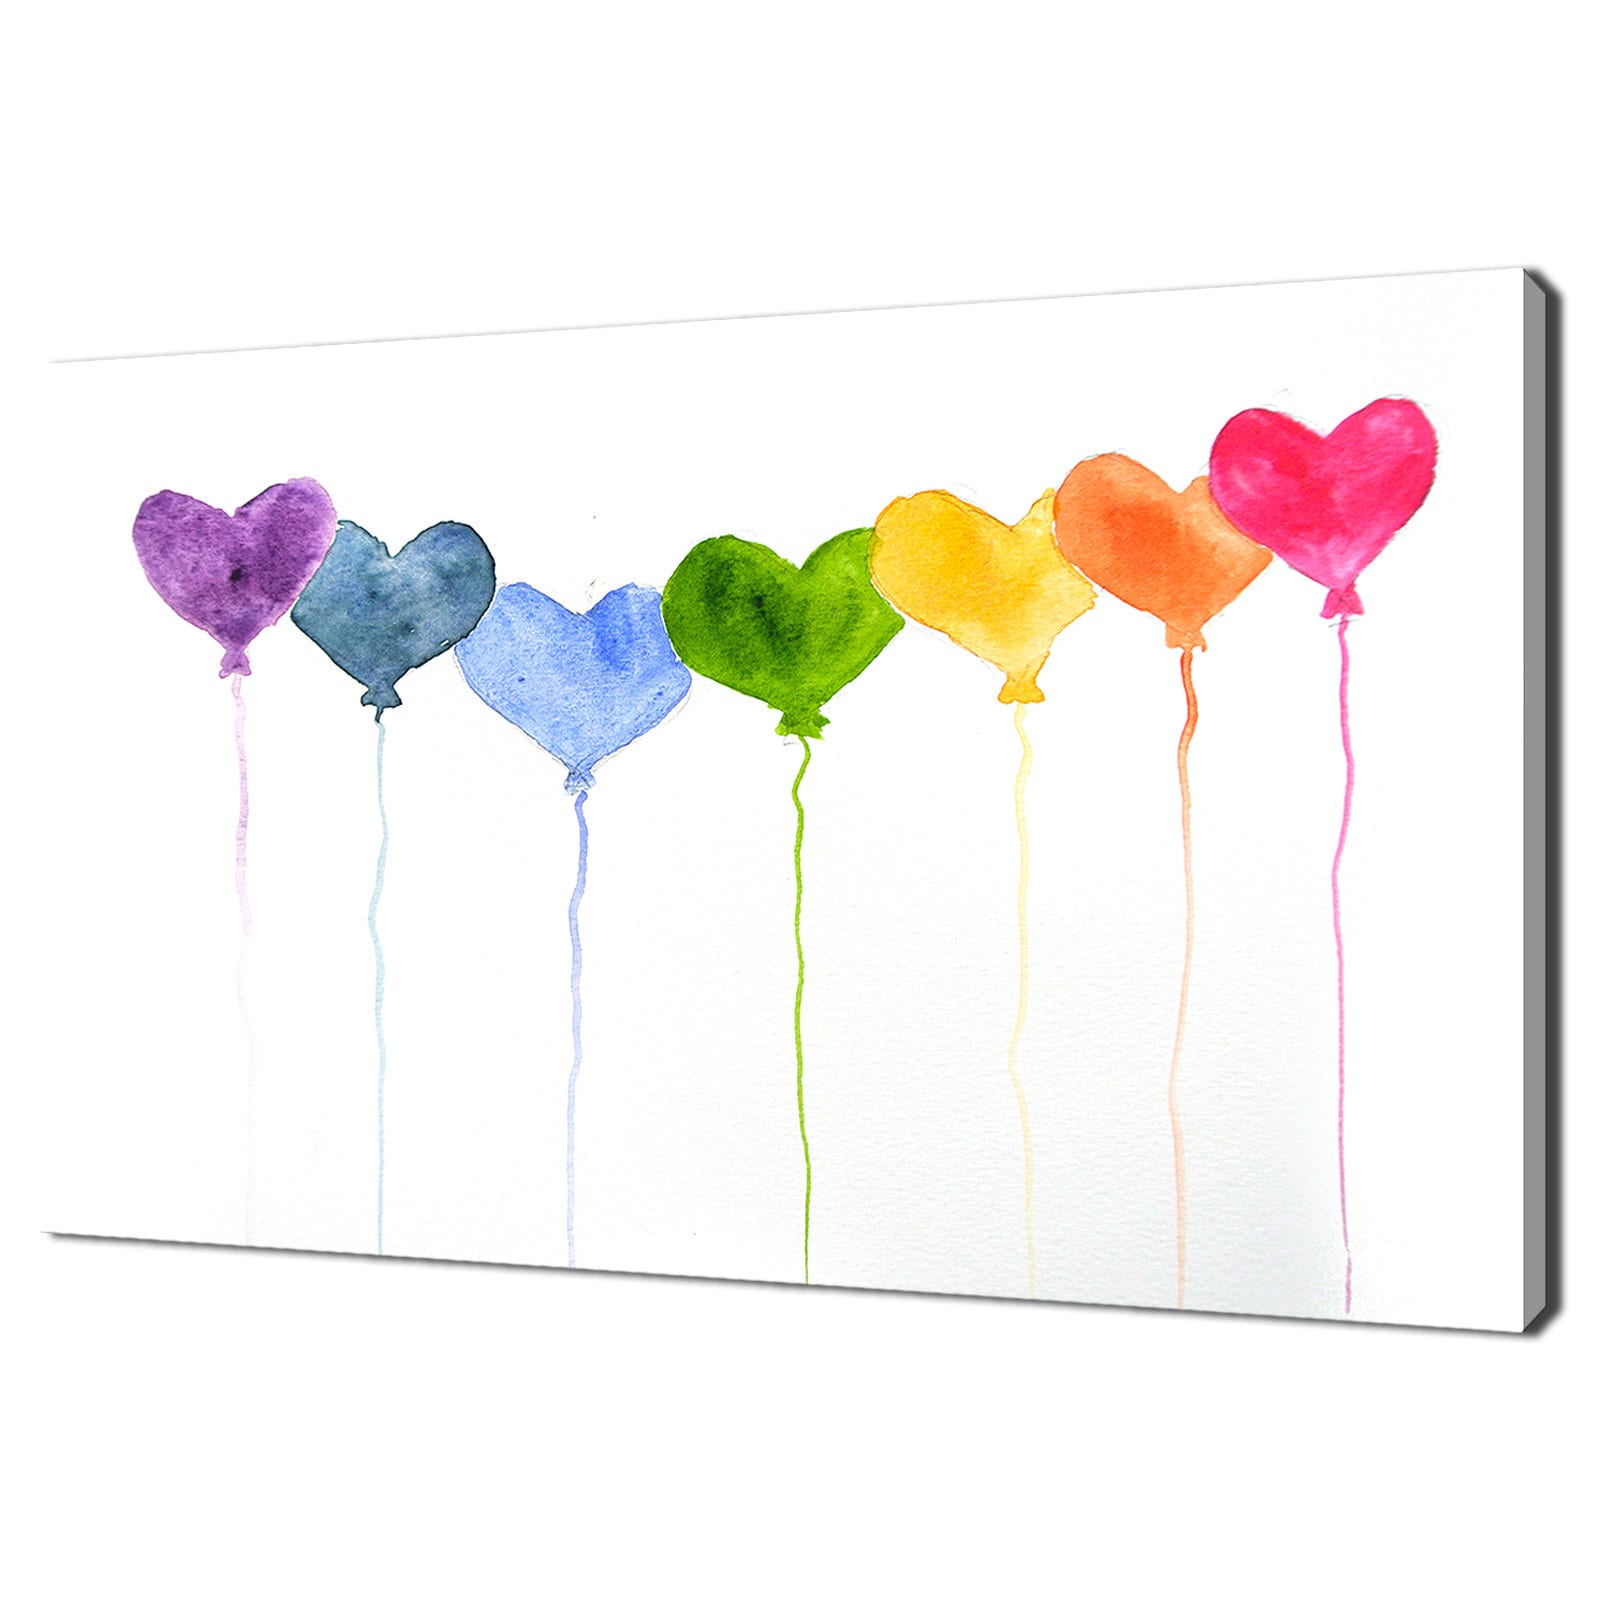 White & Silver Glitter Sparkly Love Heart Canvas Wall Art Picture 